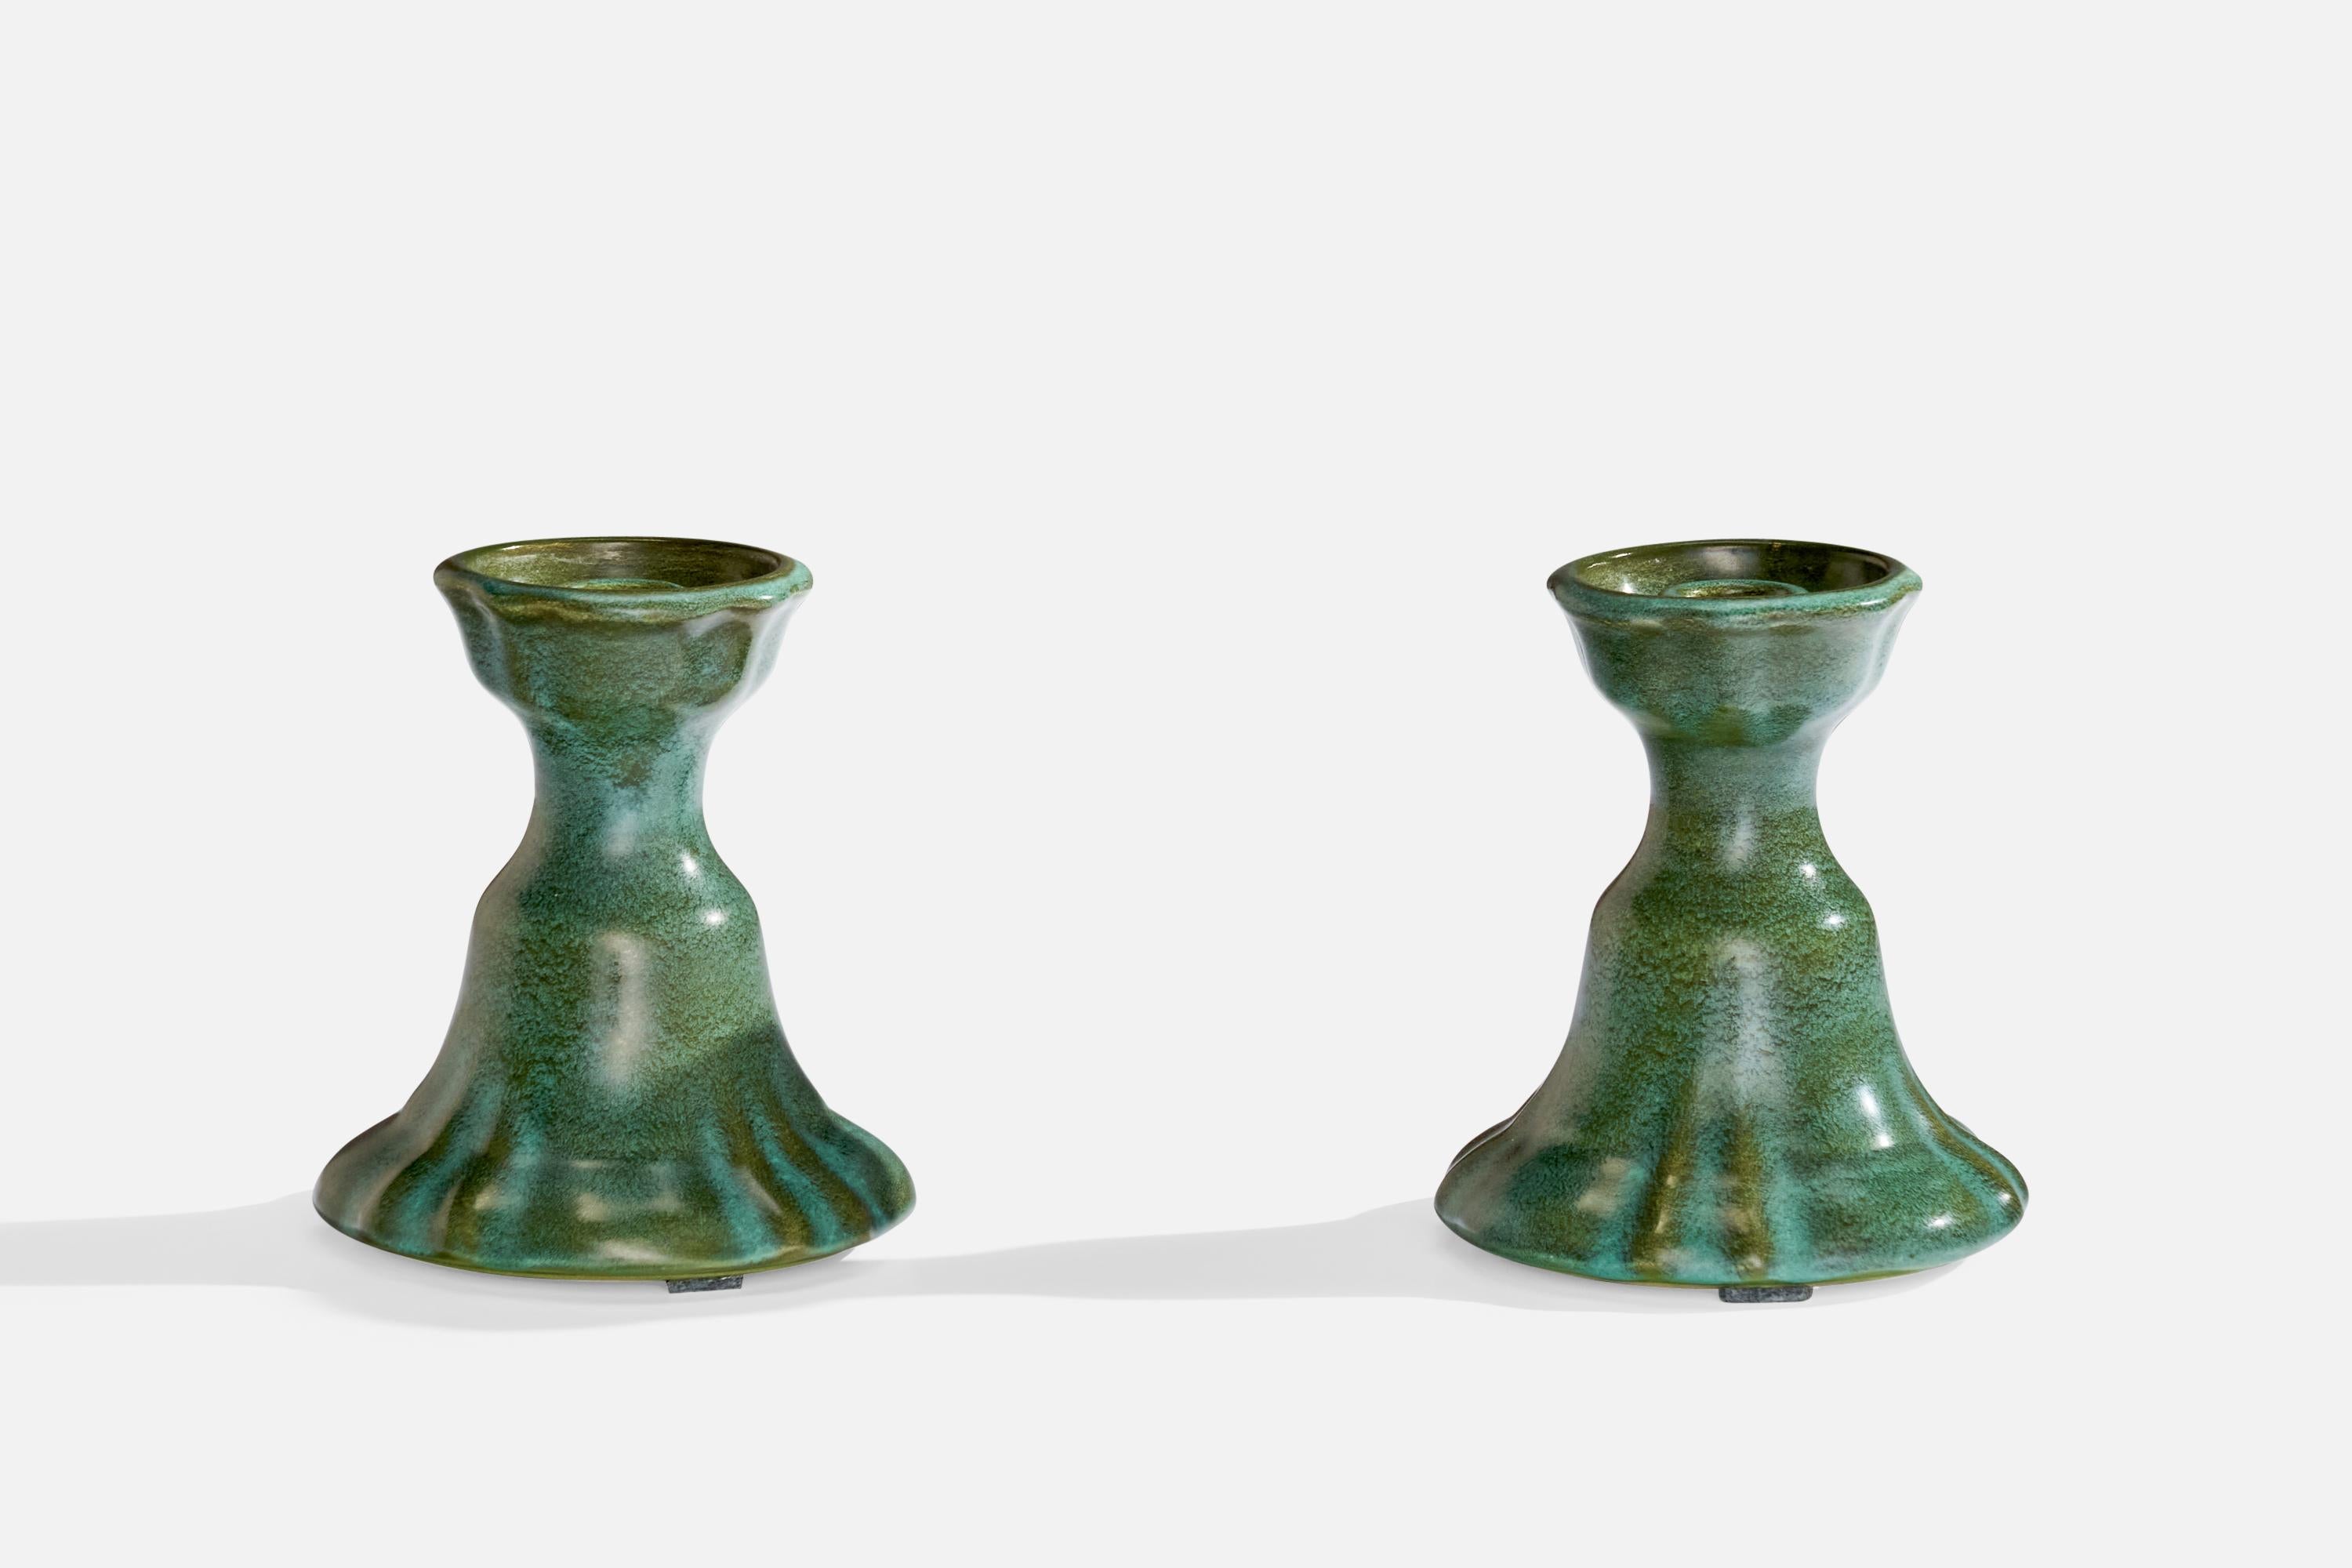 A pair of candlesticks designed designed by Allan Ebeling and produced by Bo Fajans, Sweden, c. 1920s.